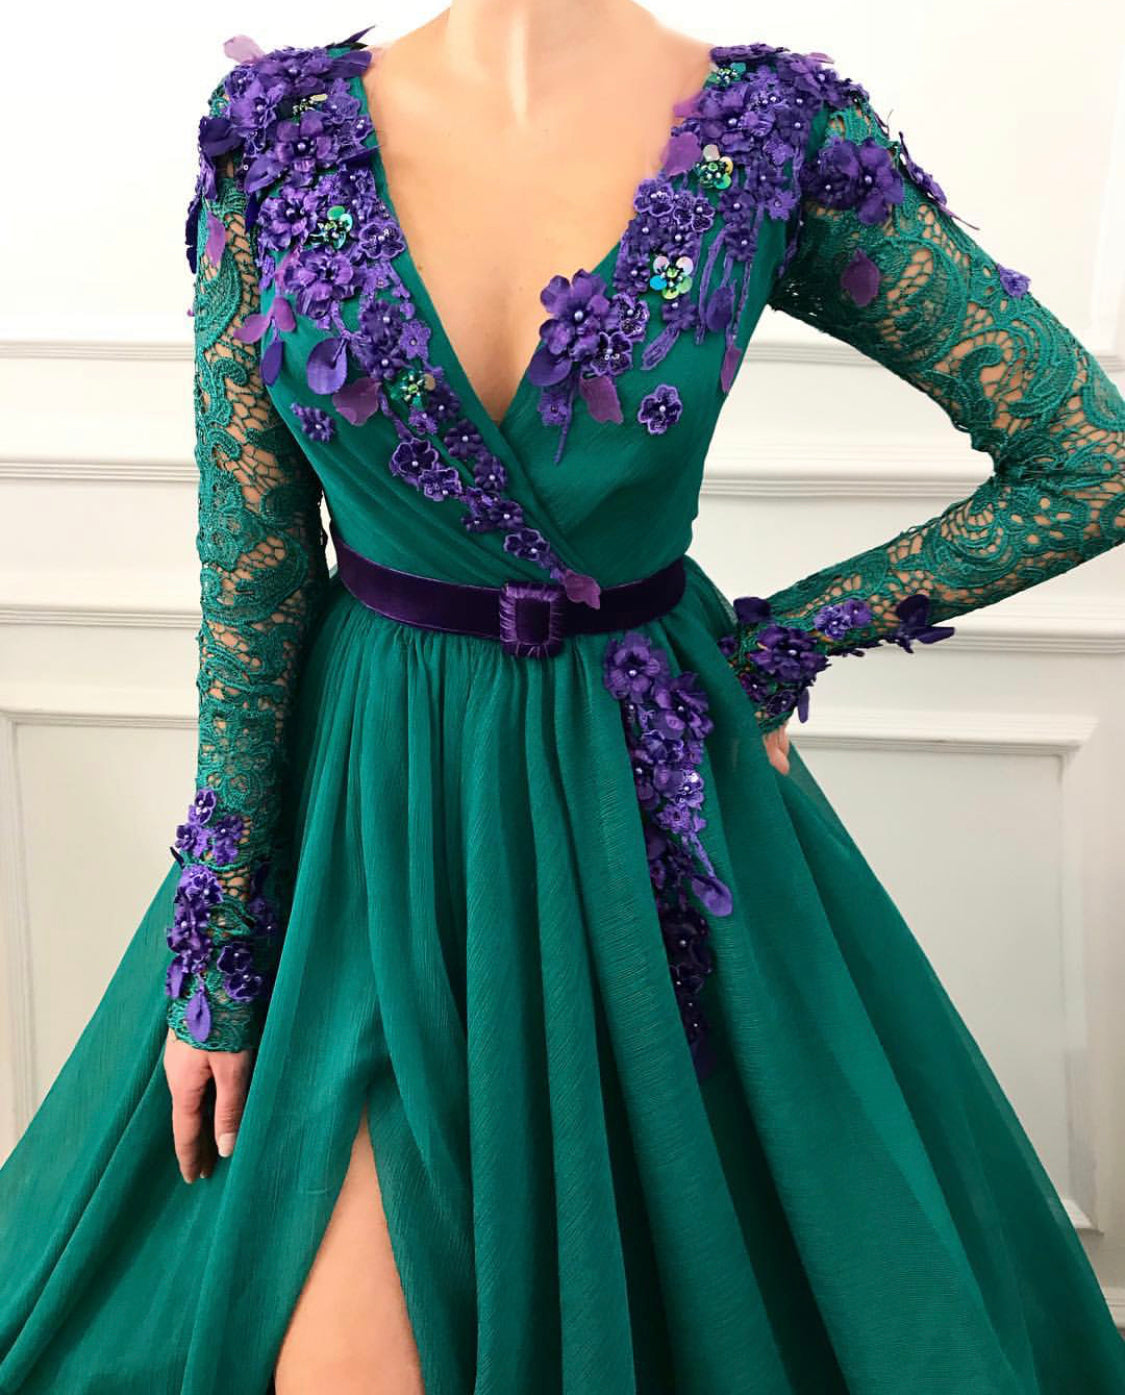 Green A-Line dress with long sleeves, v-neck, belt and embroidery